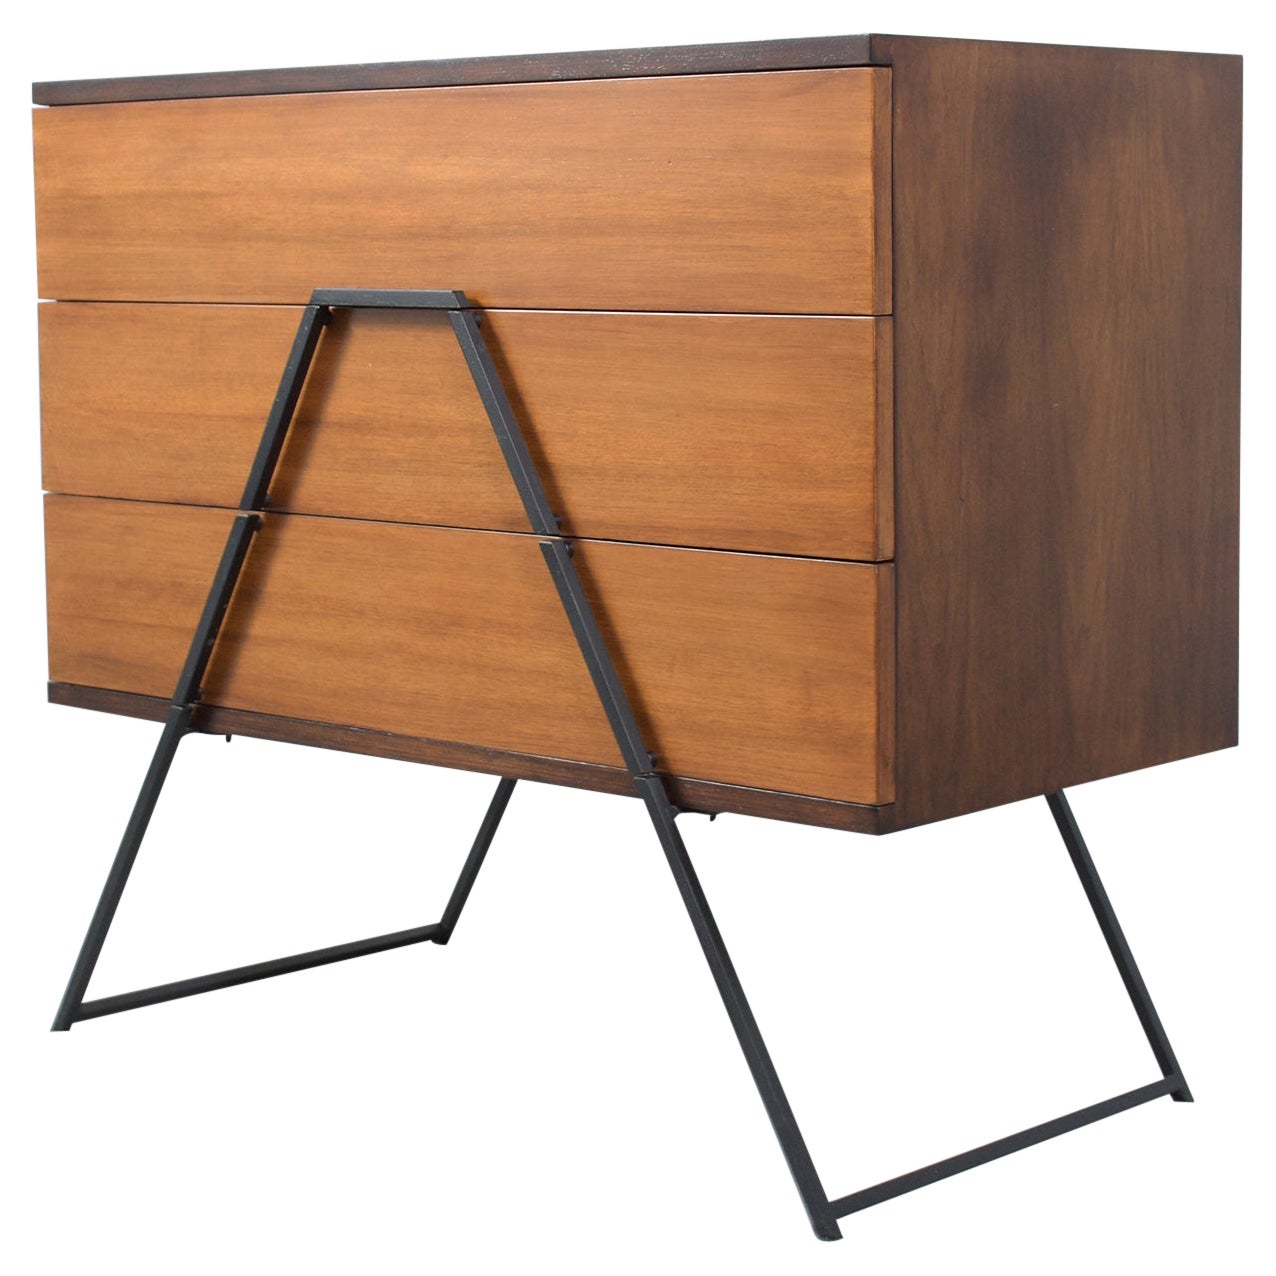 Restored 1960s Mid-Century Modern Wood Chest with Wrought Iron Handles